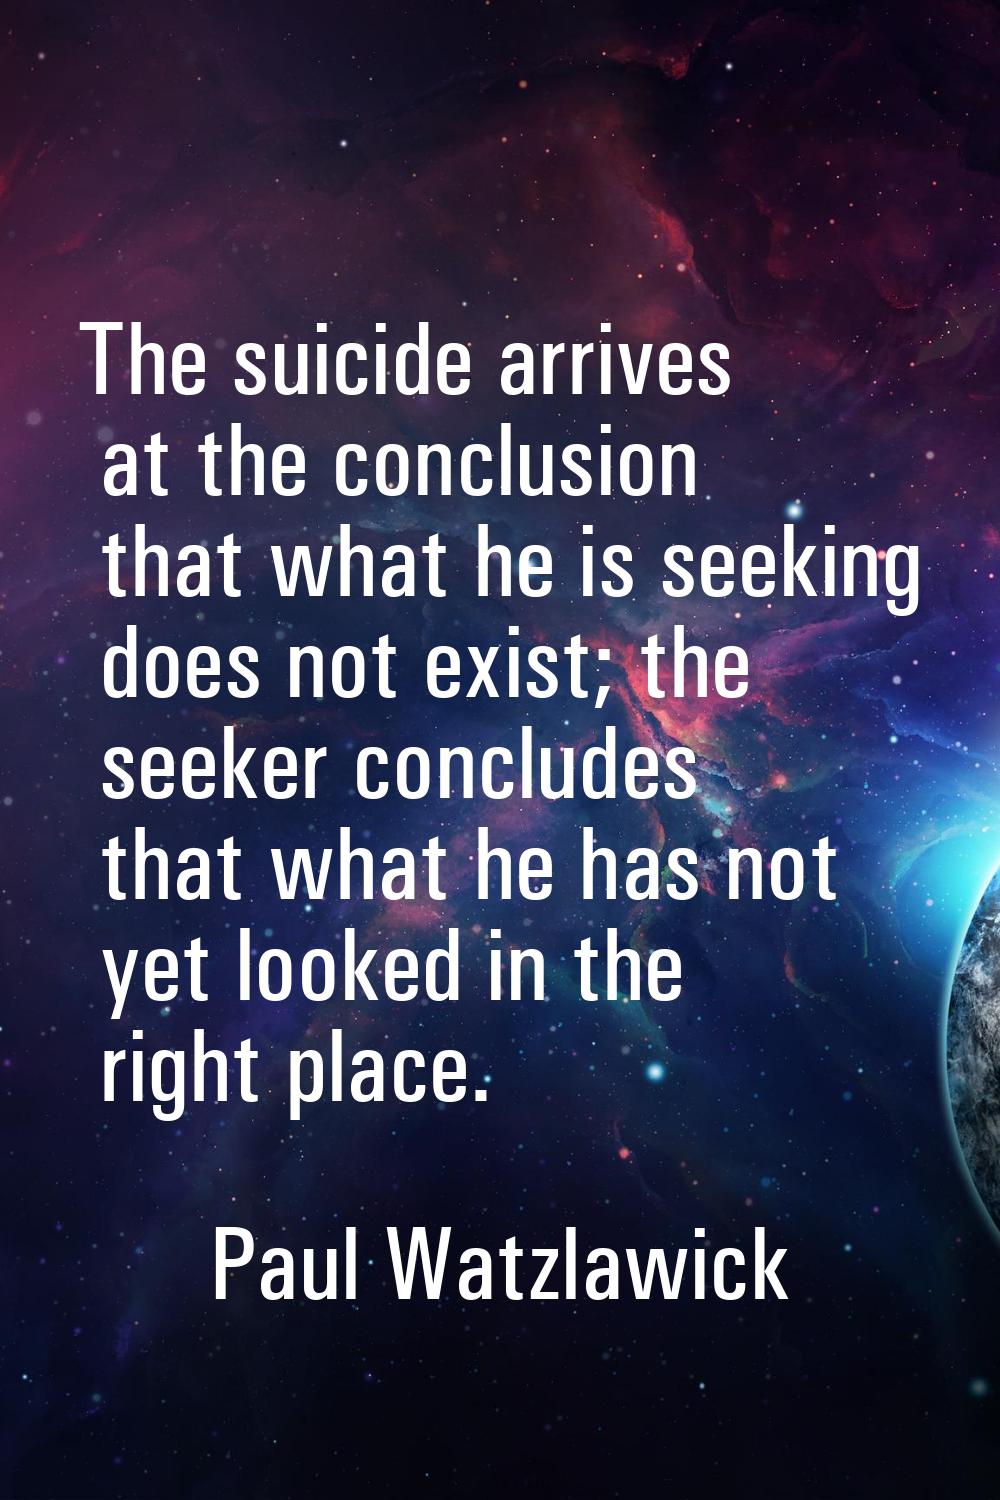 The suicide arrives at the conclusion that what he is seeking does not exist; the seeker concludes 